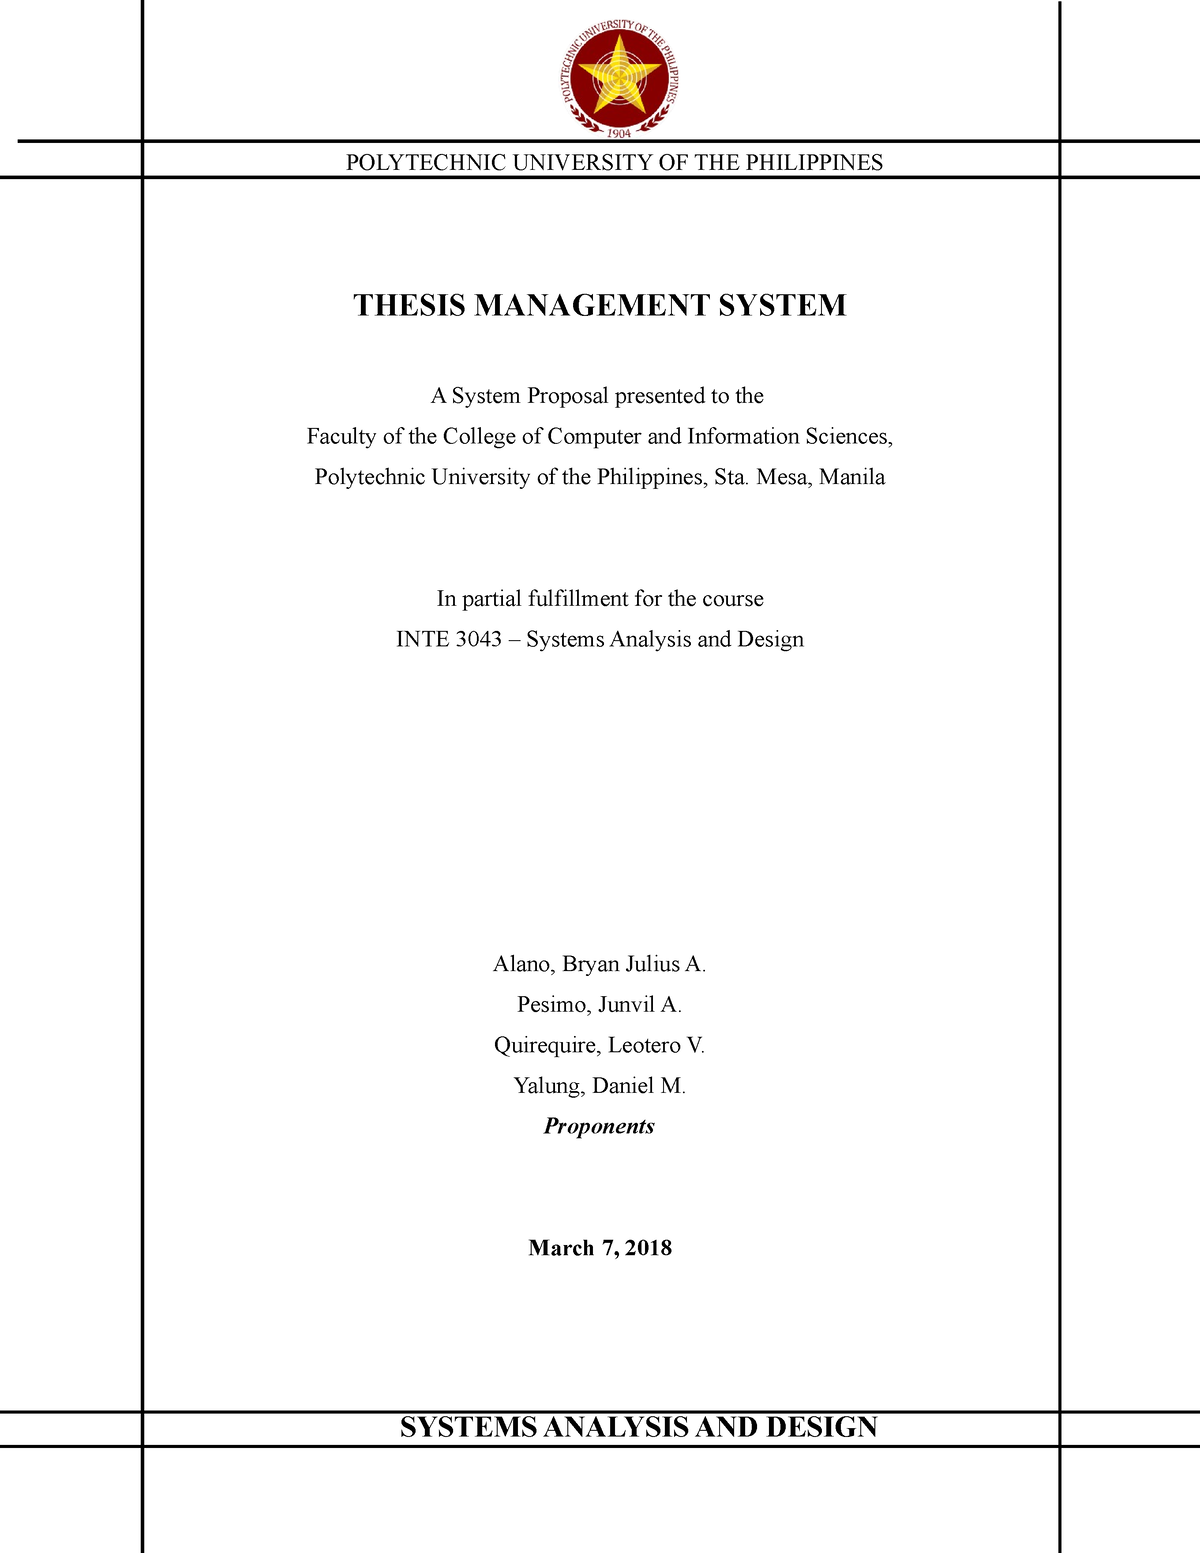 thesis management control system